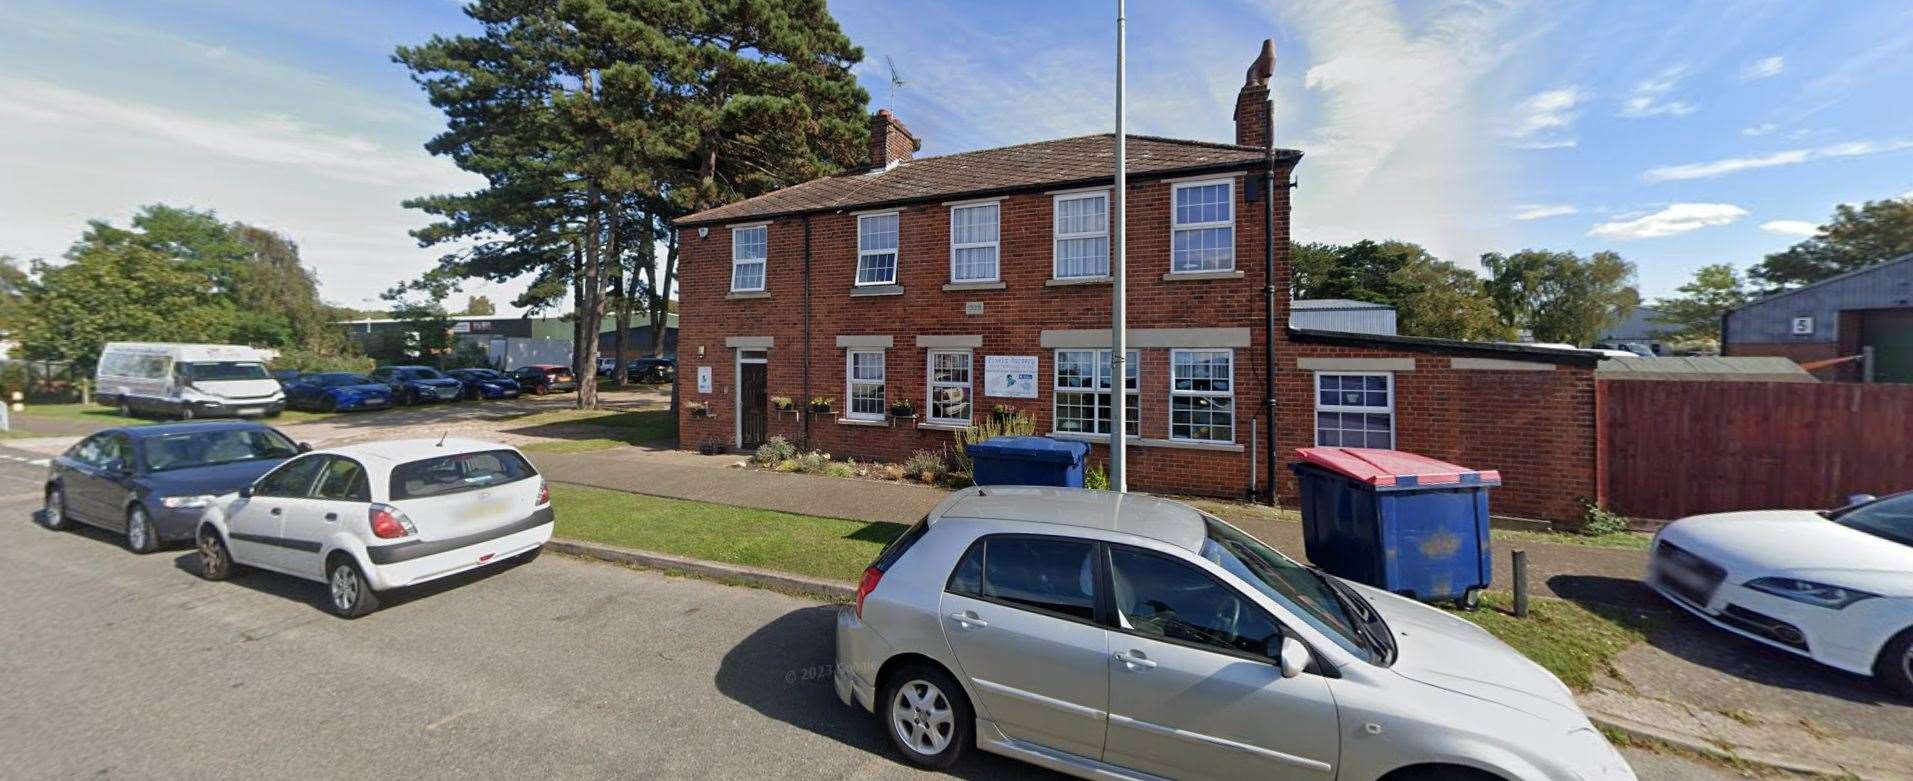 Pixels Nursery, in Martlesham, which has closed after the collapse of Alpha Nurseries. Picture: Google Maps